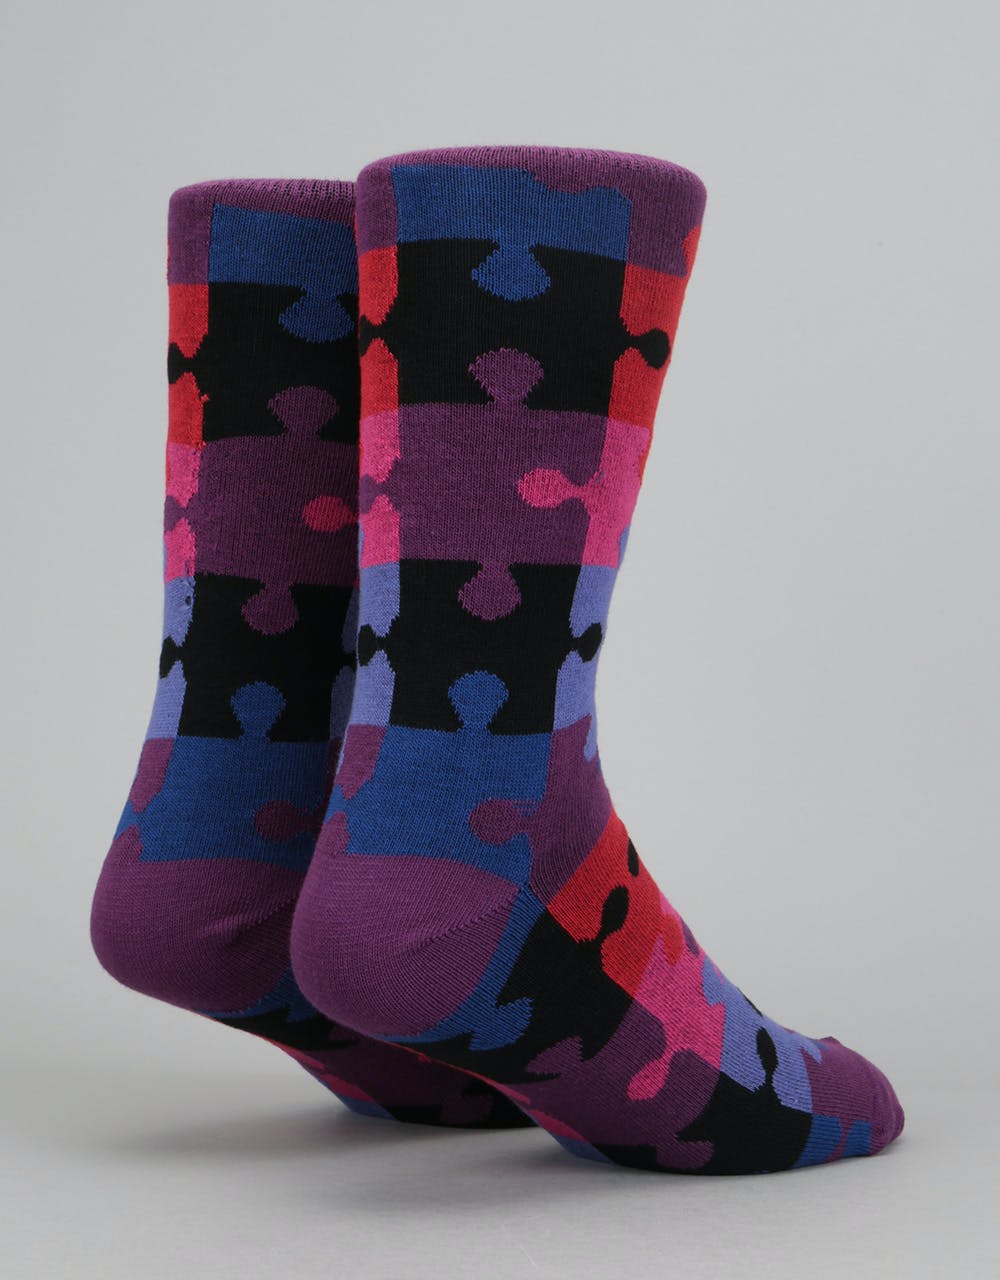 Route One Puzzle Socks - Reds